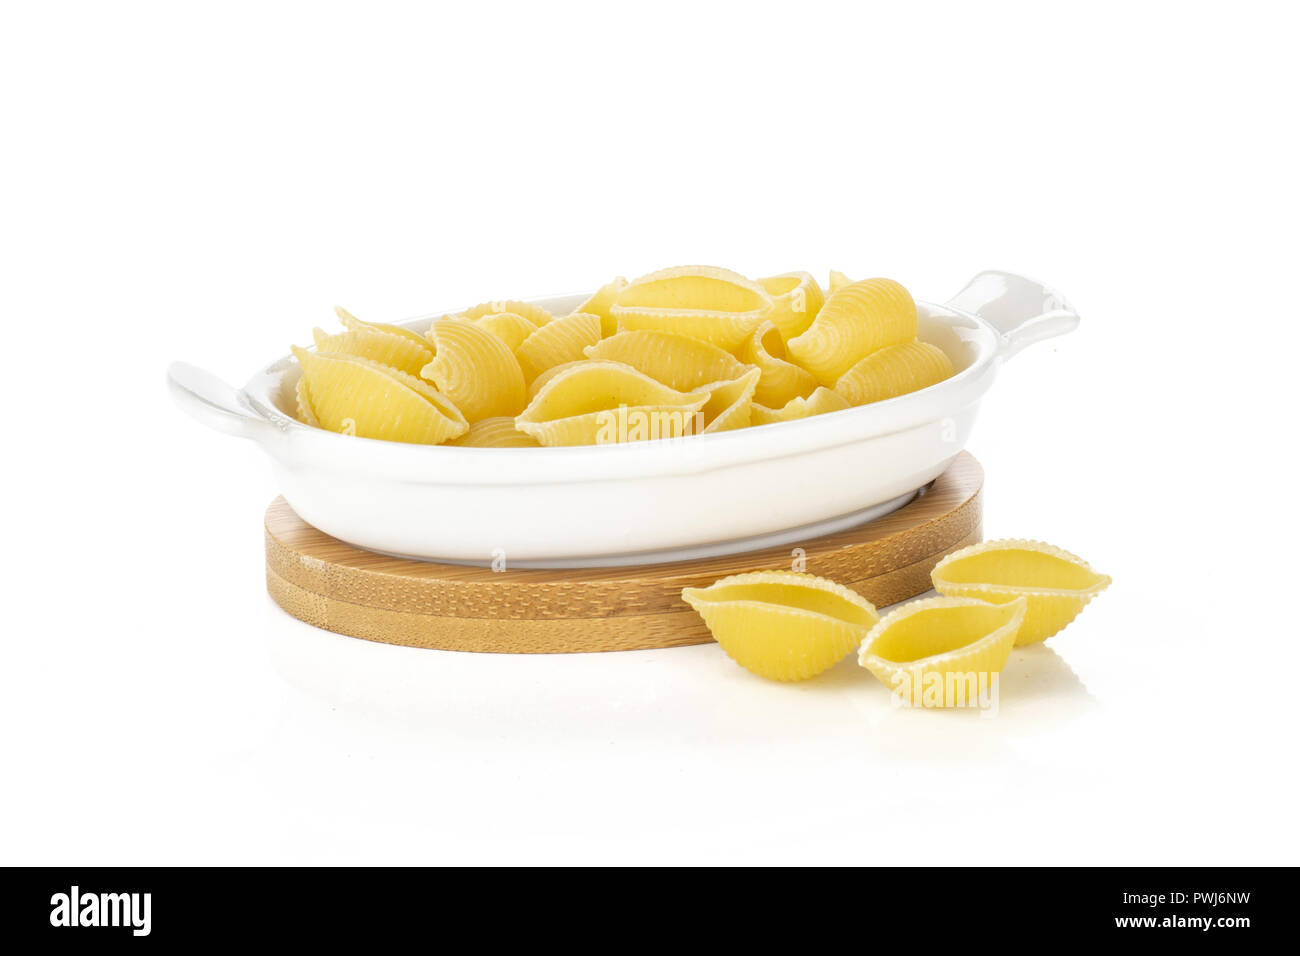 Lot of whole uncooked raw yellow pasta conchiglie variety in a ceramic stewpan isolated on white background Stock Photo